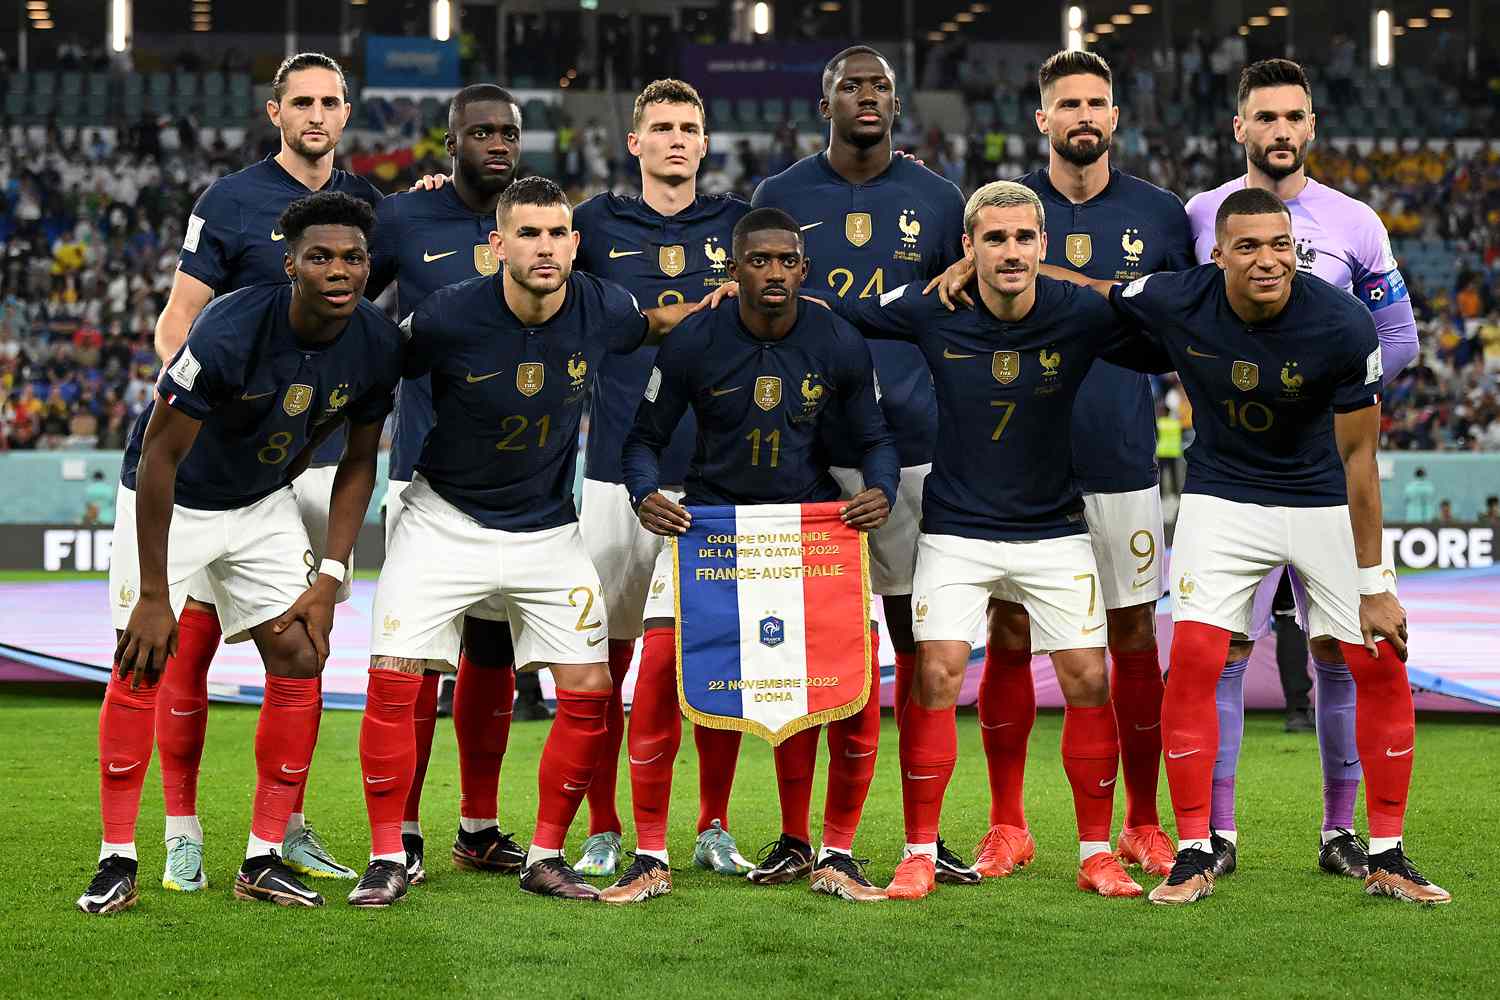 FIFA 2022: Liberte, Egalite, Africanite: Desperate France Plays The Race Card and Still Loses